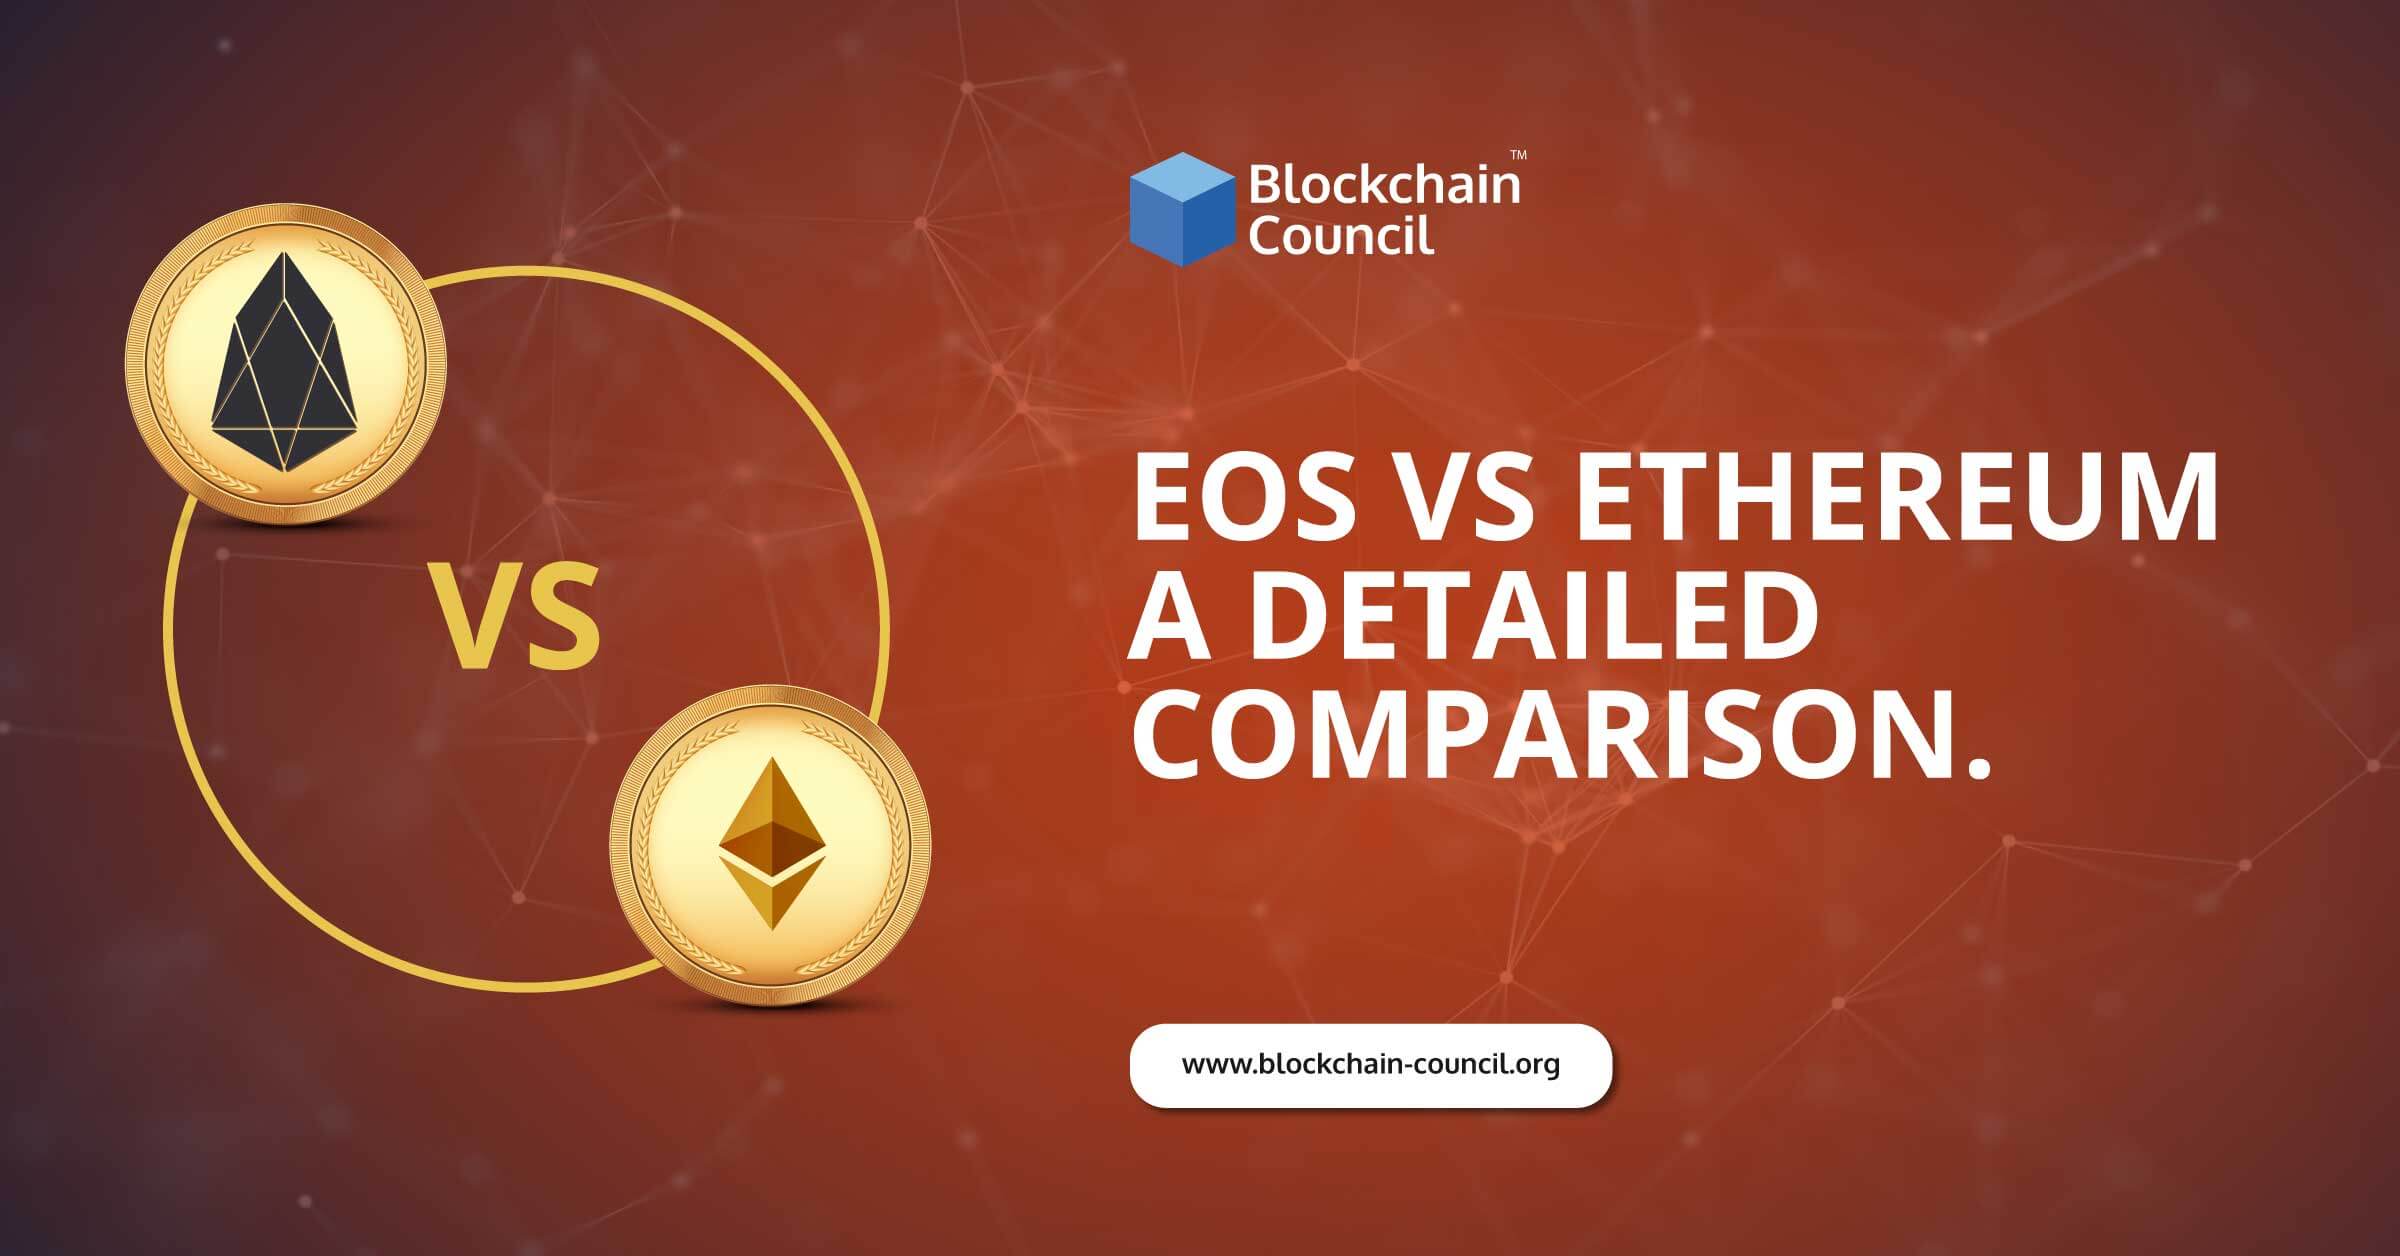 eos and ethereum